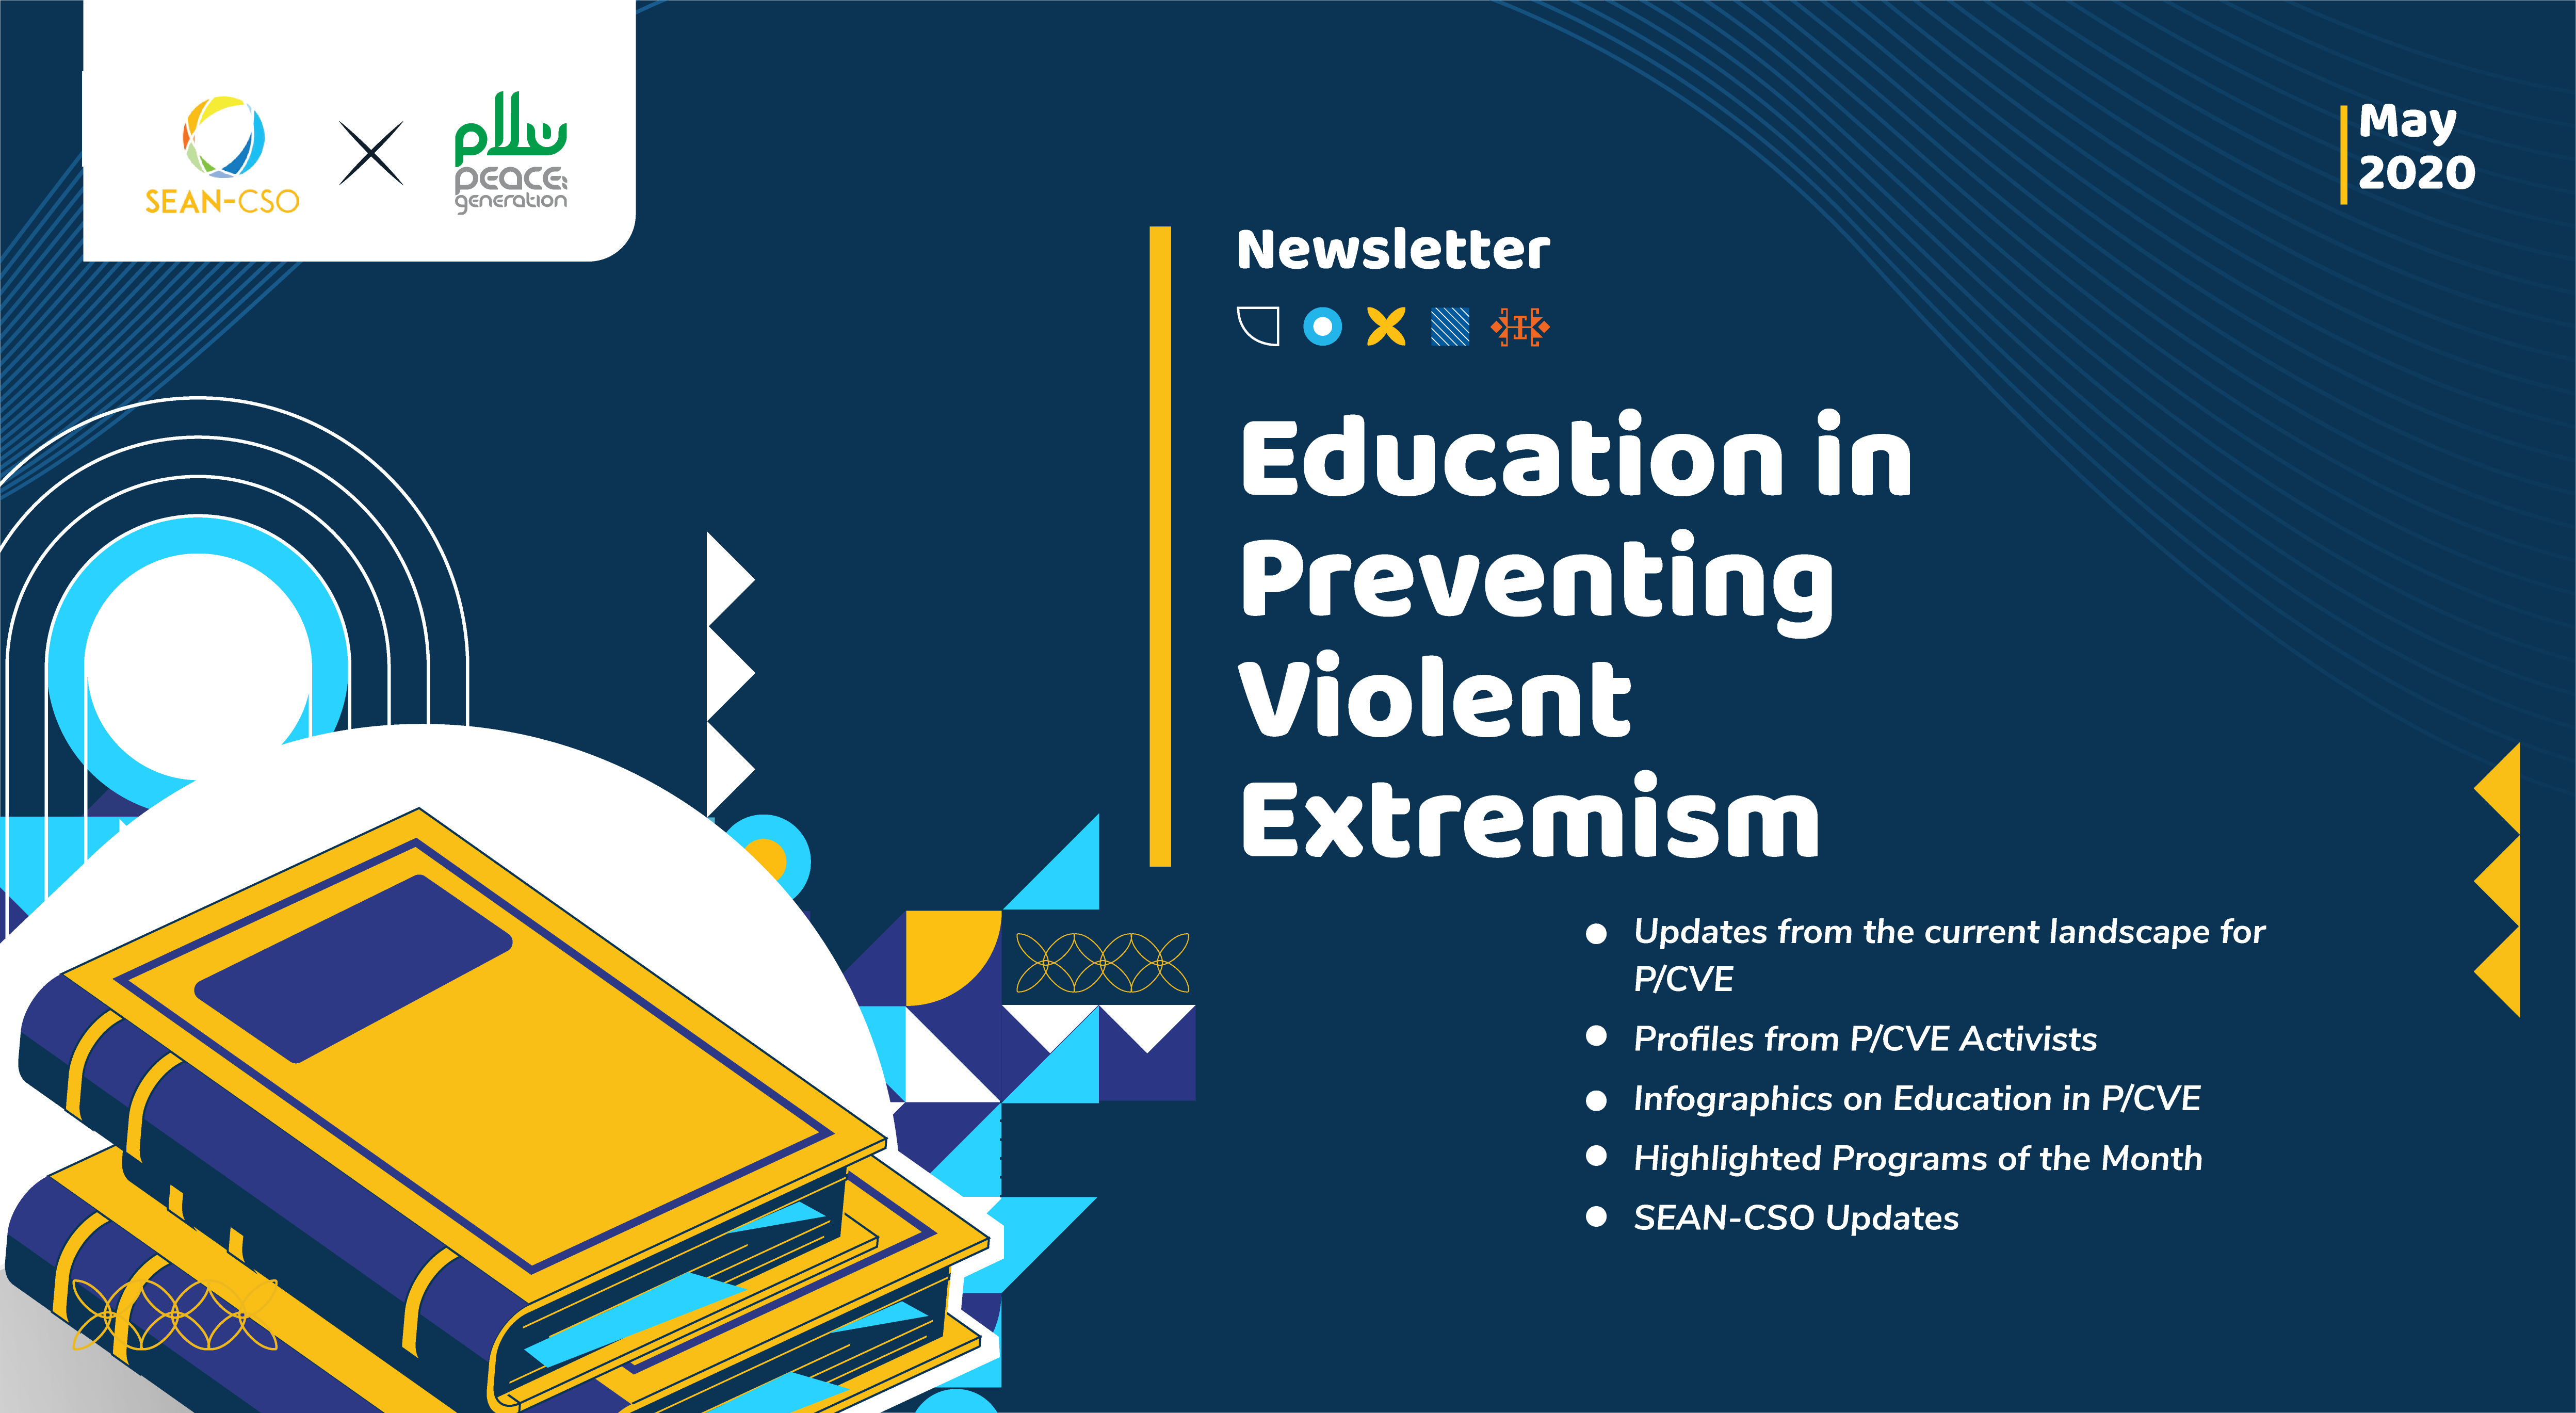 [Newsletter] May 2020: Education in Preventing Violent Extremism